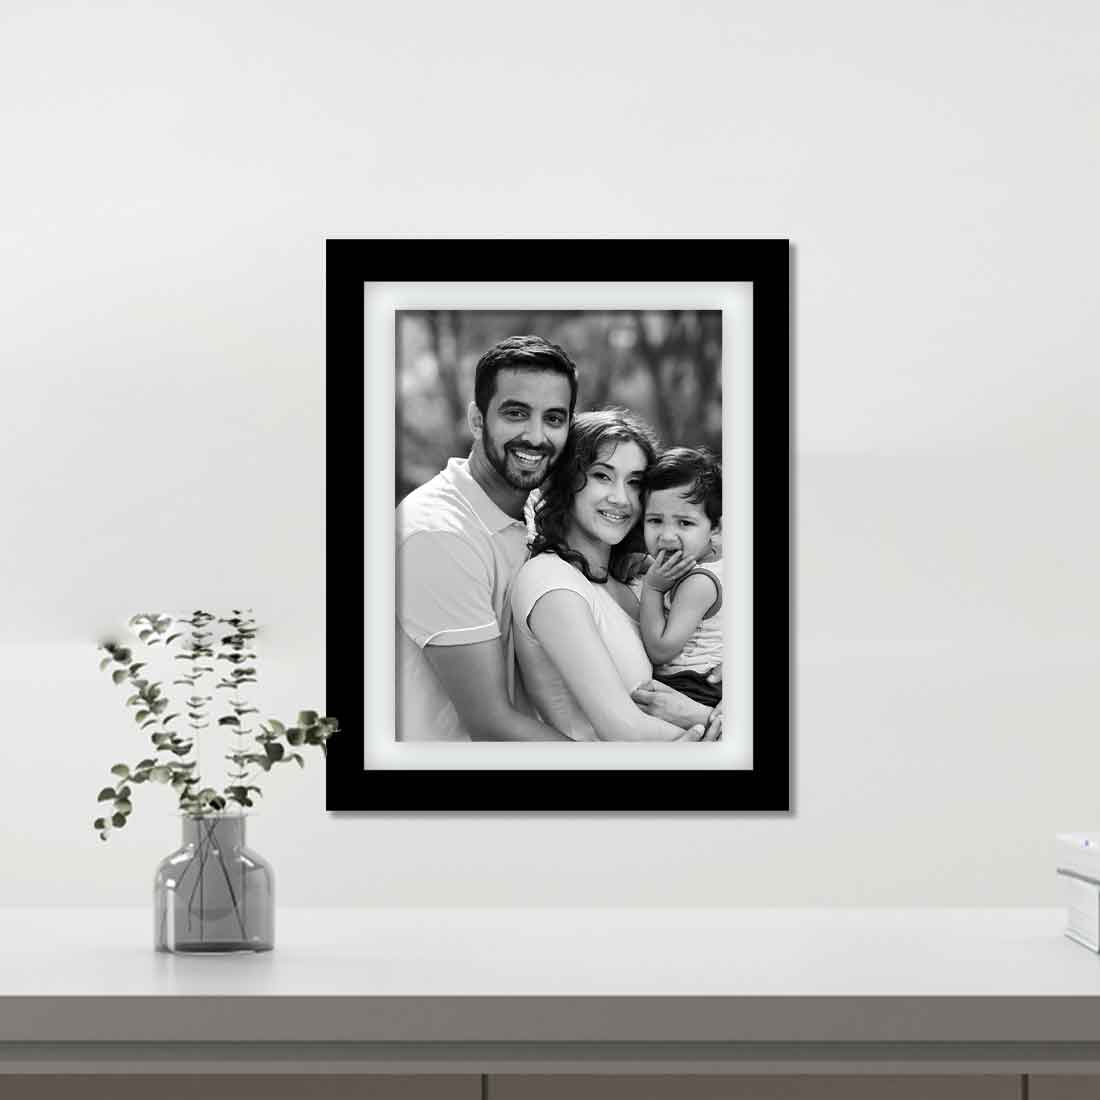 Black and White Frame for Wall Custom Picture Frame 8x10 Inch (Set of 3)